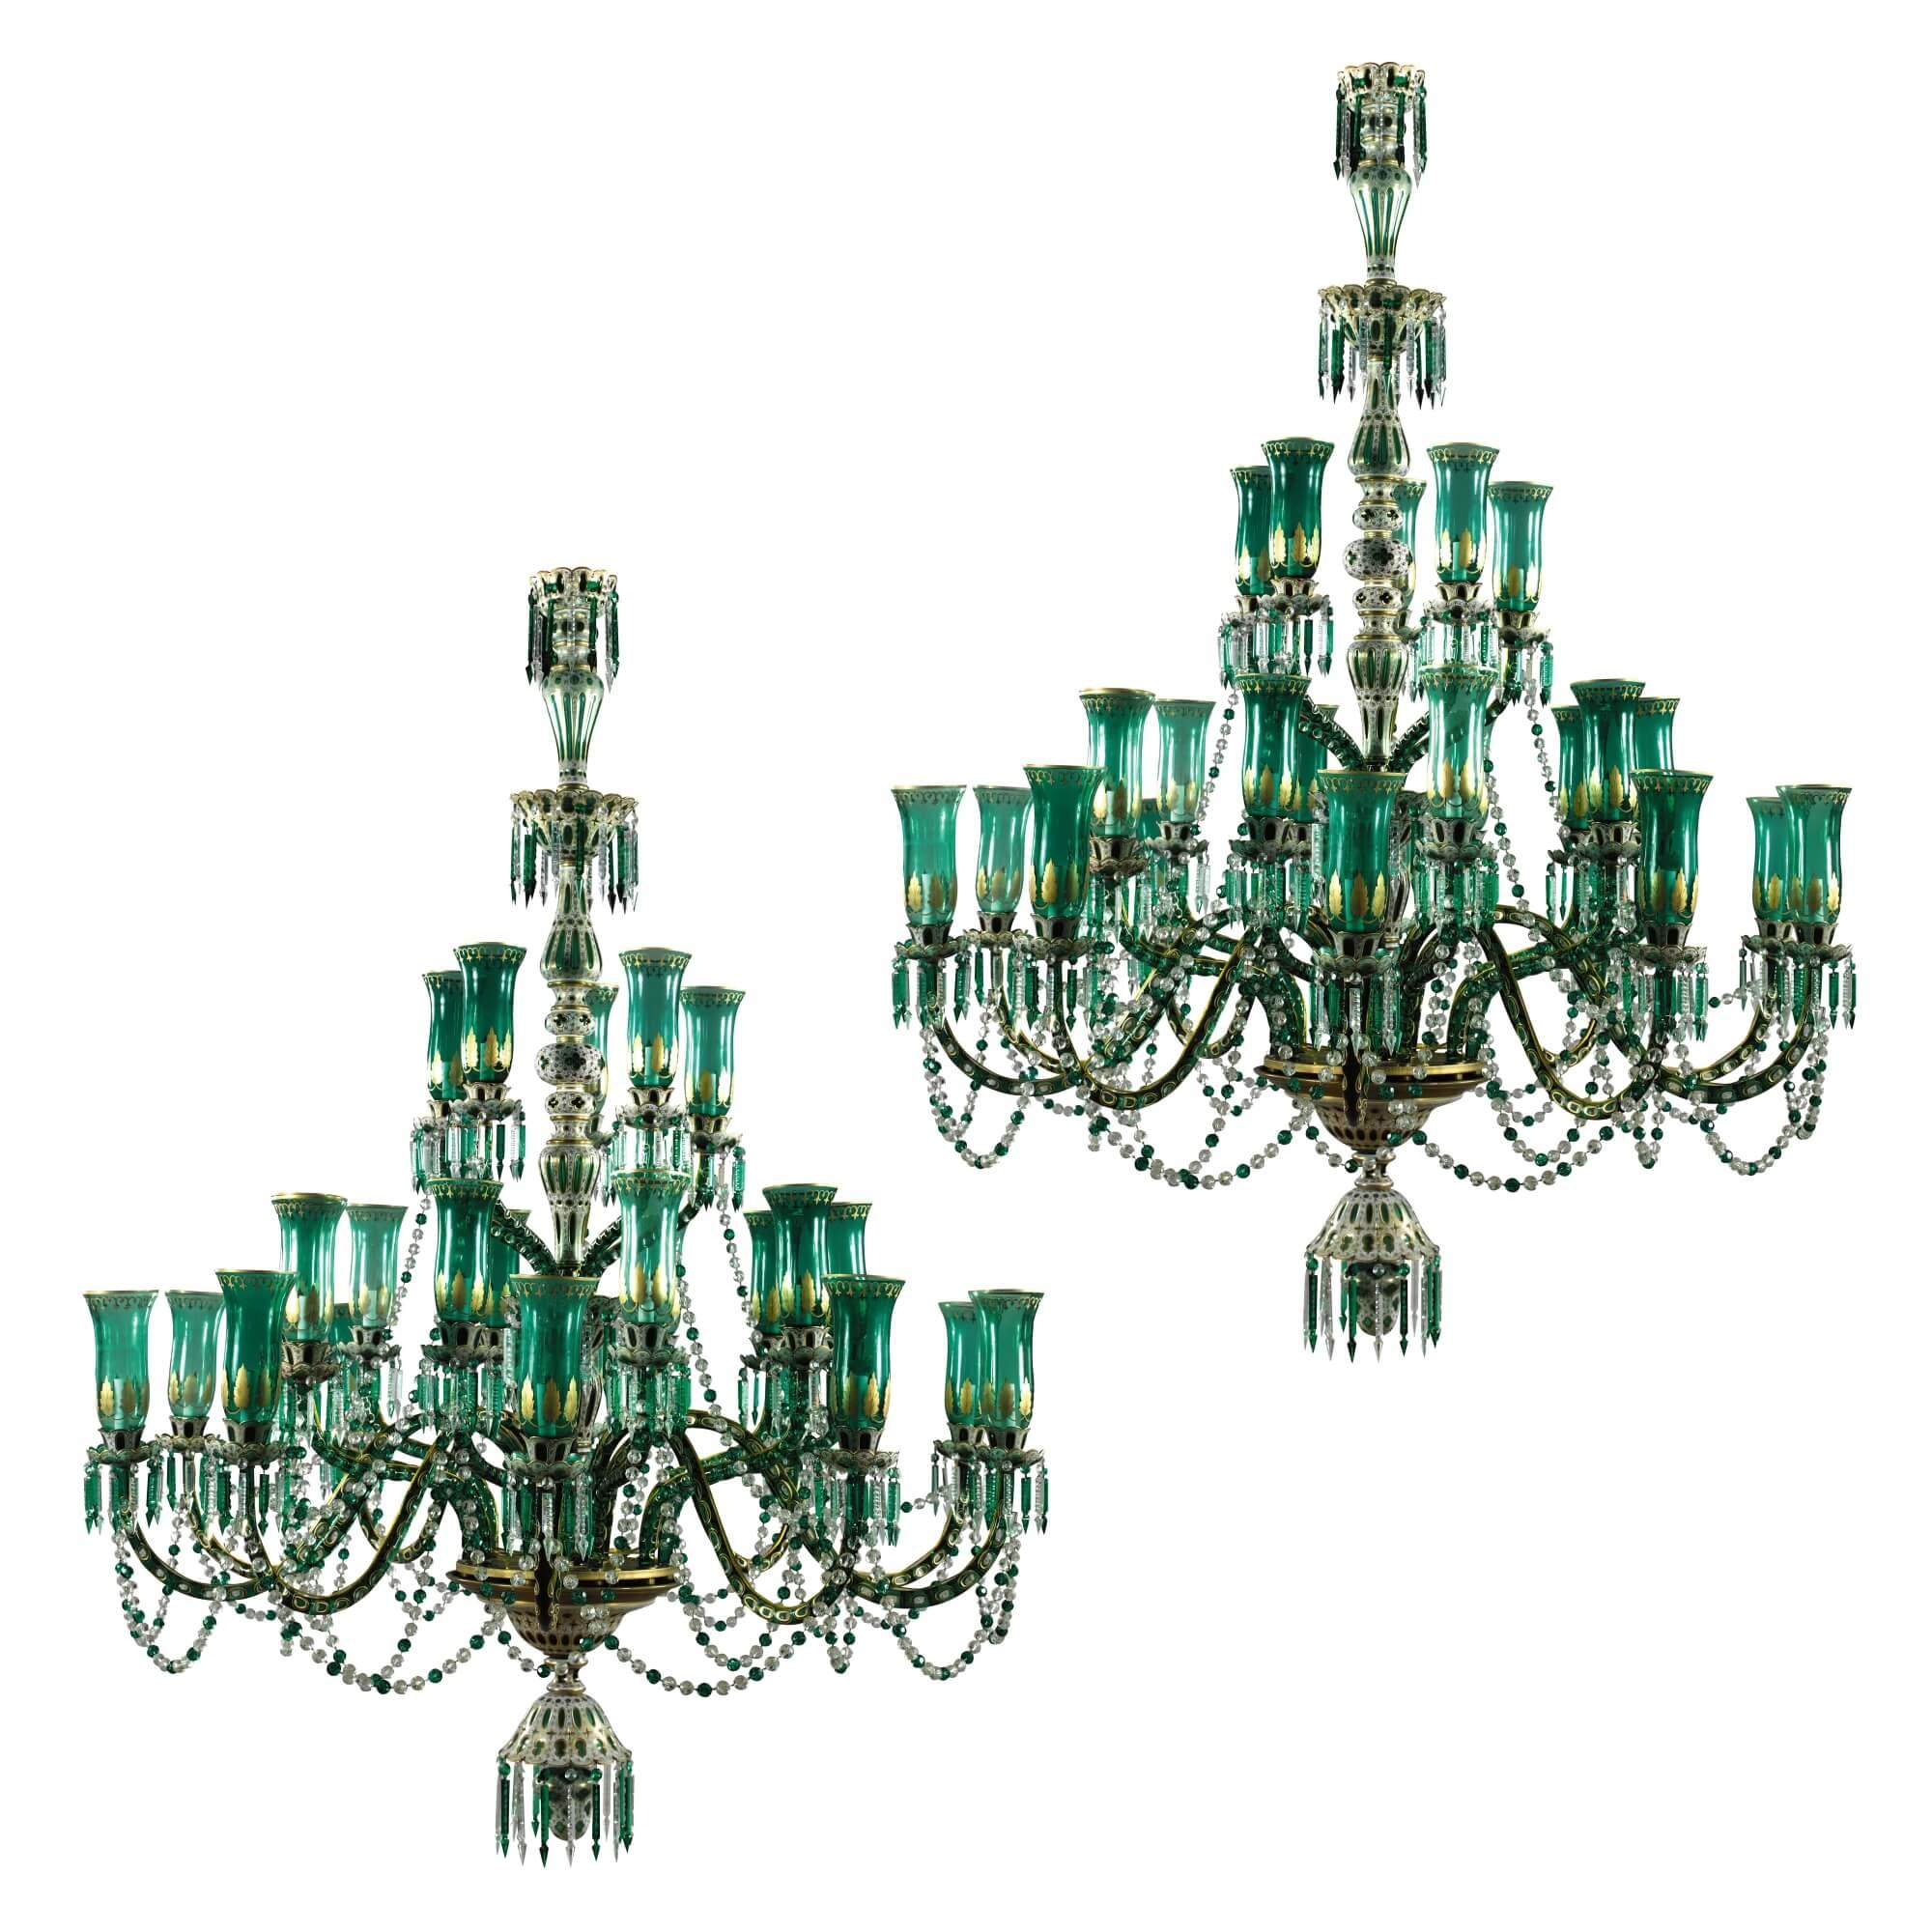 Two Large Green and Parcel Gilt Glass Chandeliers by Osler for Indian Market